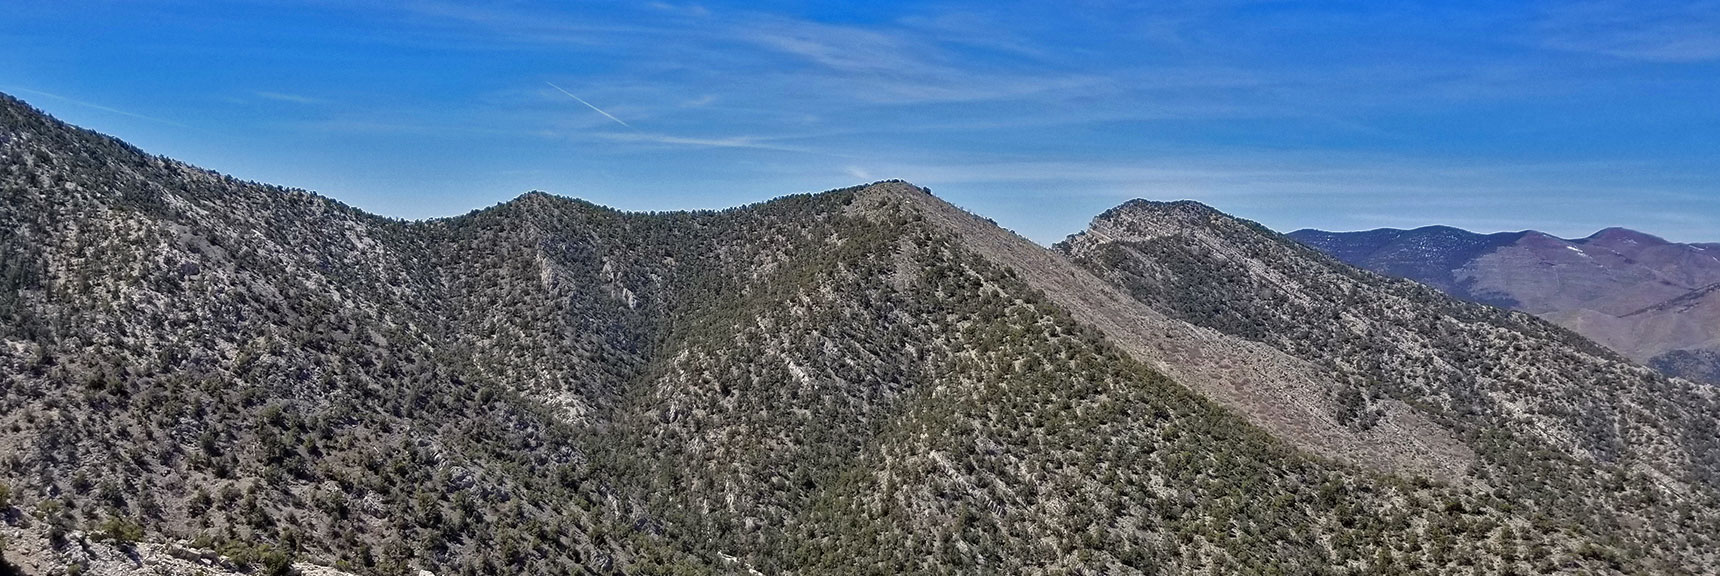 High Elevation Perspective | La Madre Mountains Wilderness, Nevada | Overview